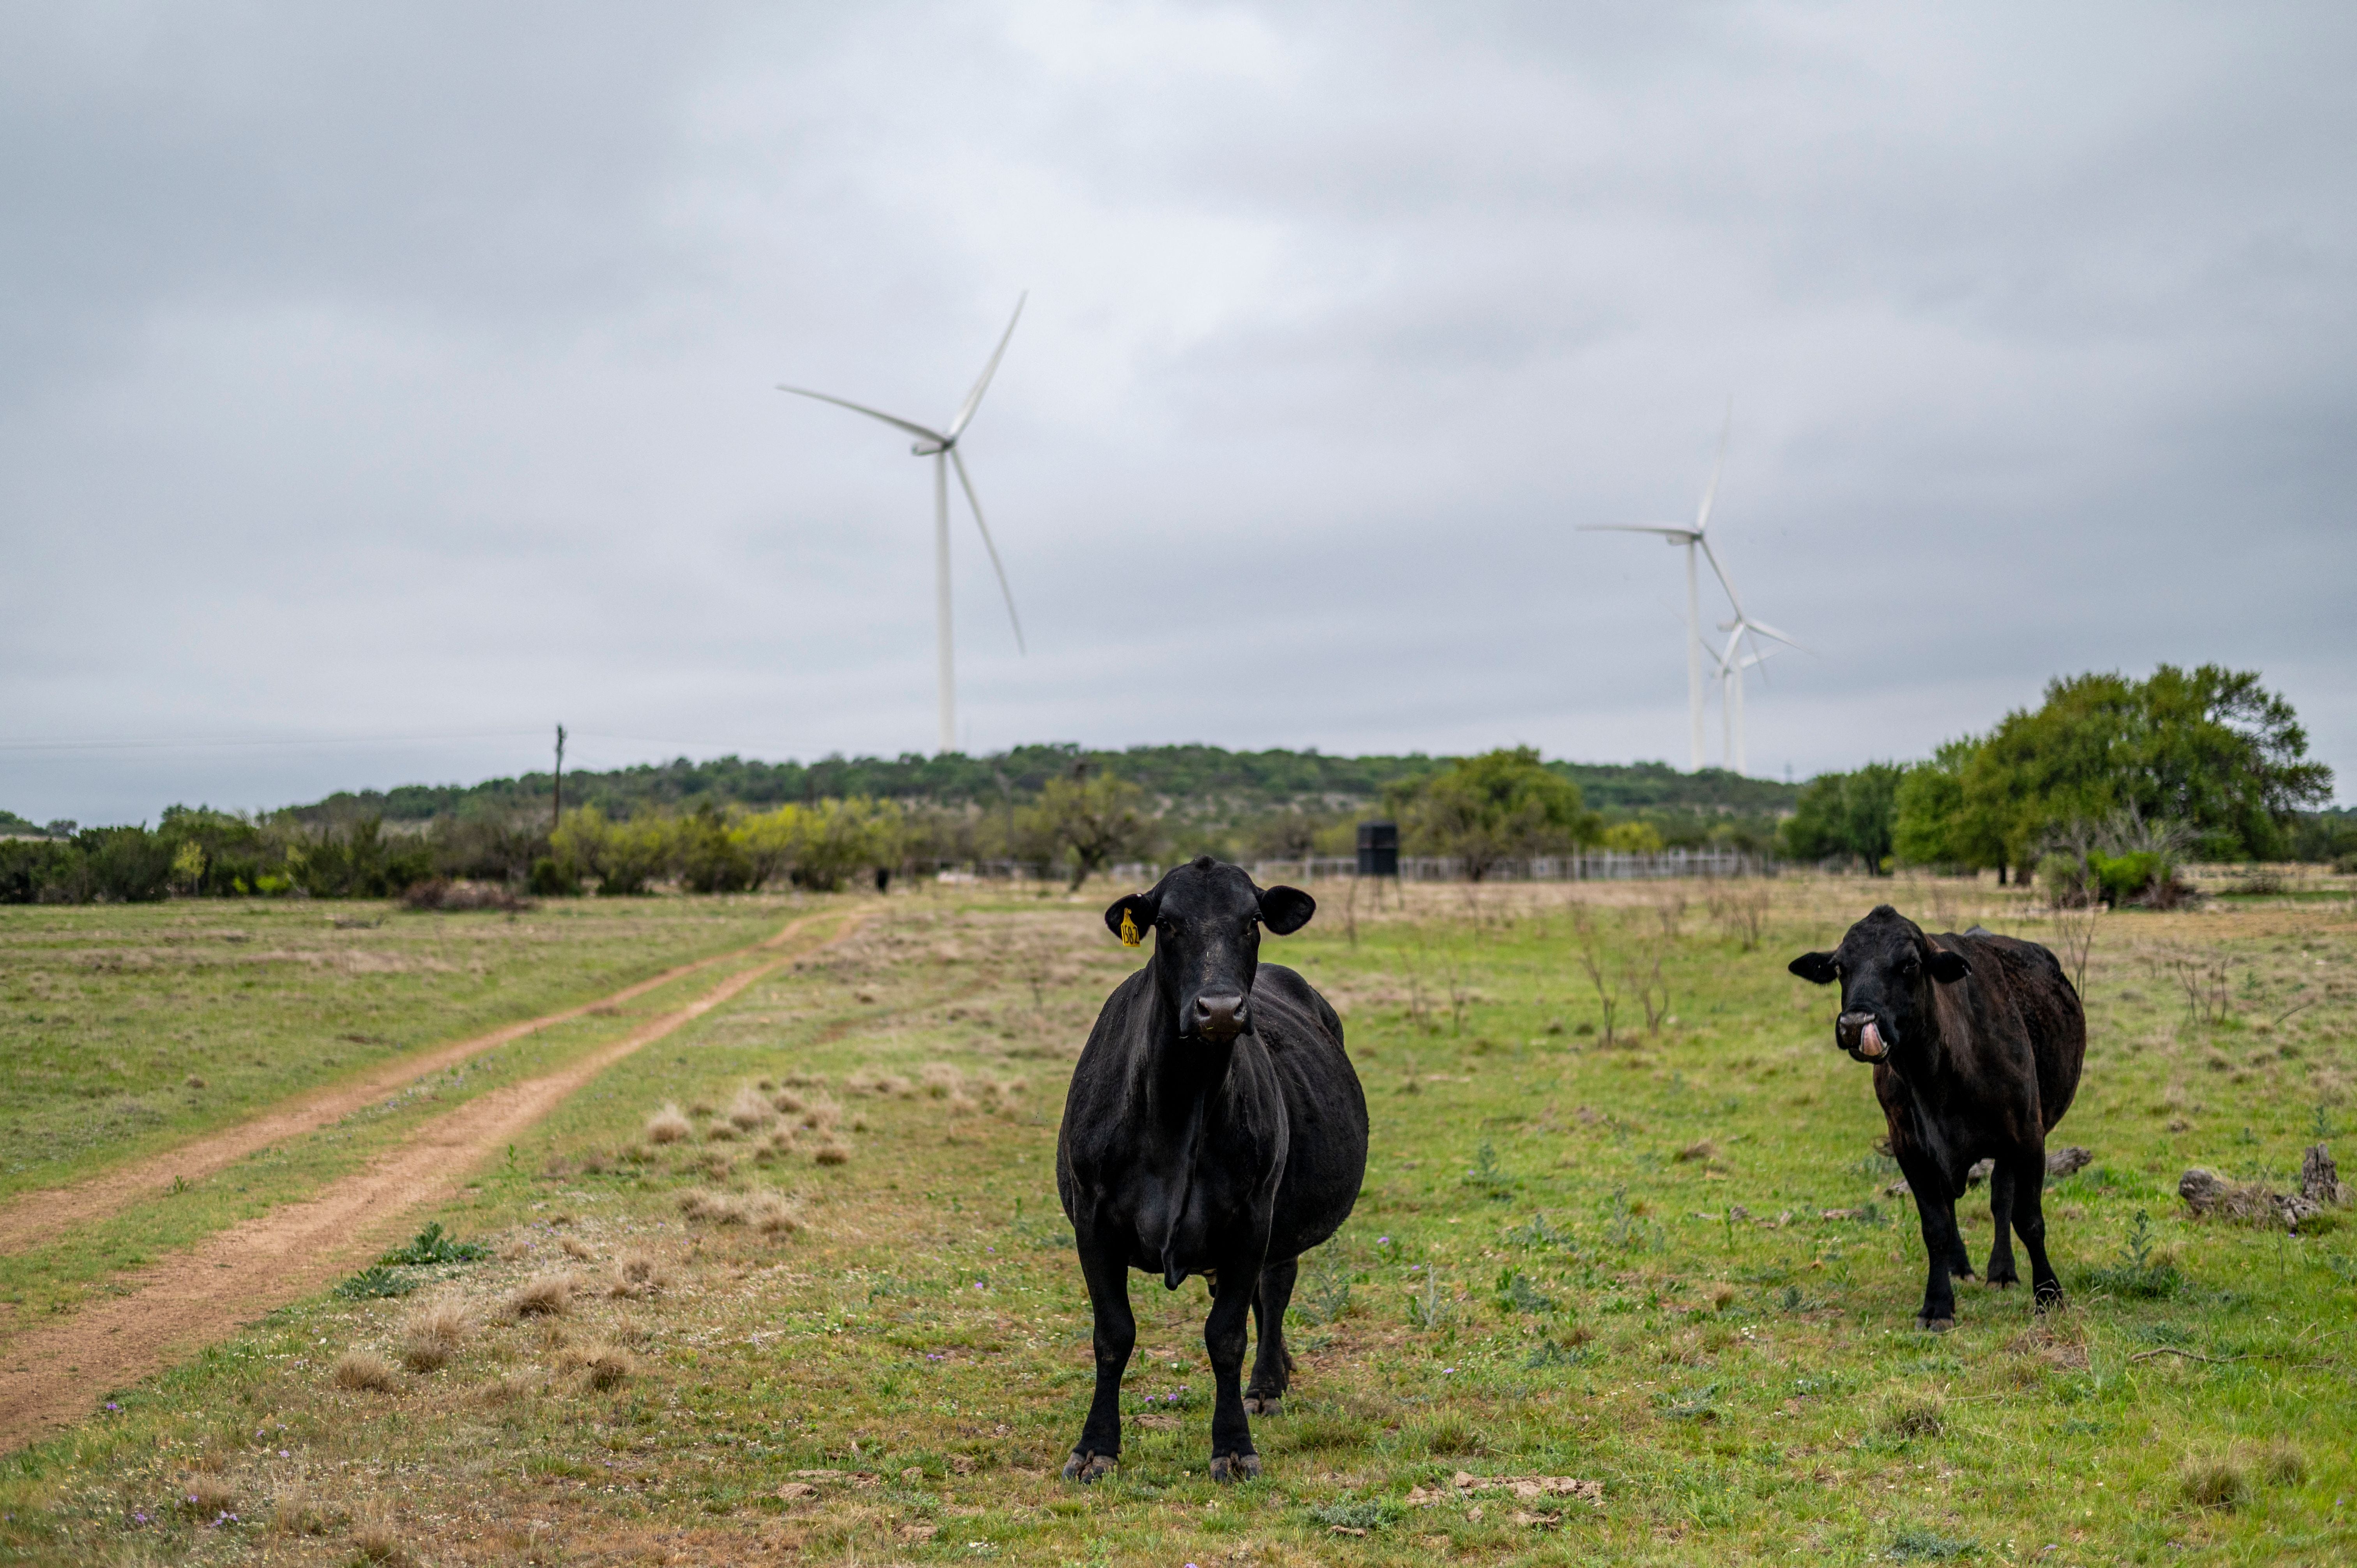 A ranch in Texas where several wind turbines have been built. Cattle farms are a major source of methane